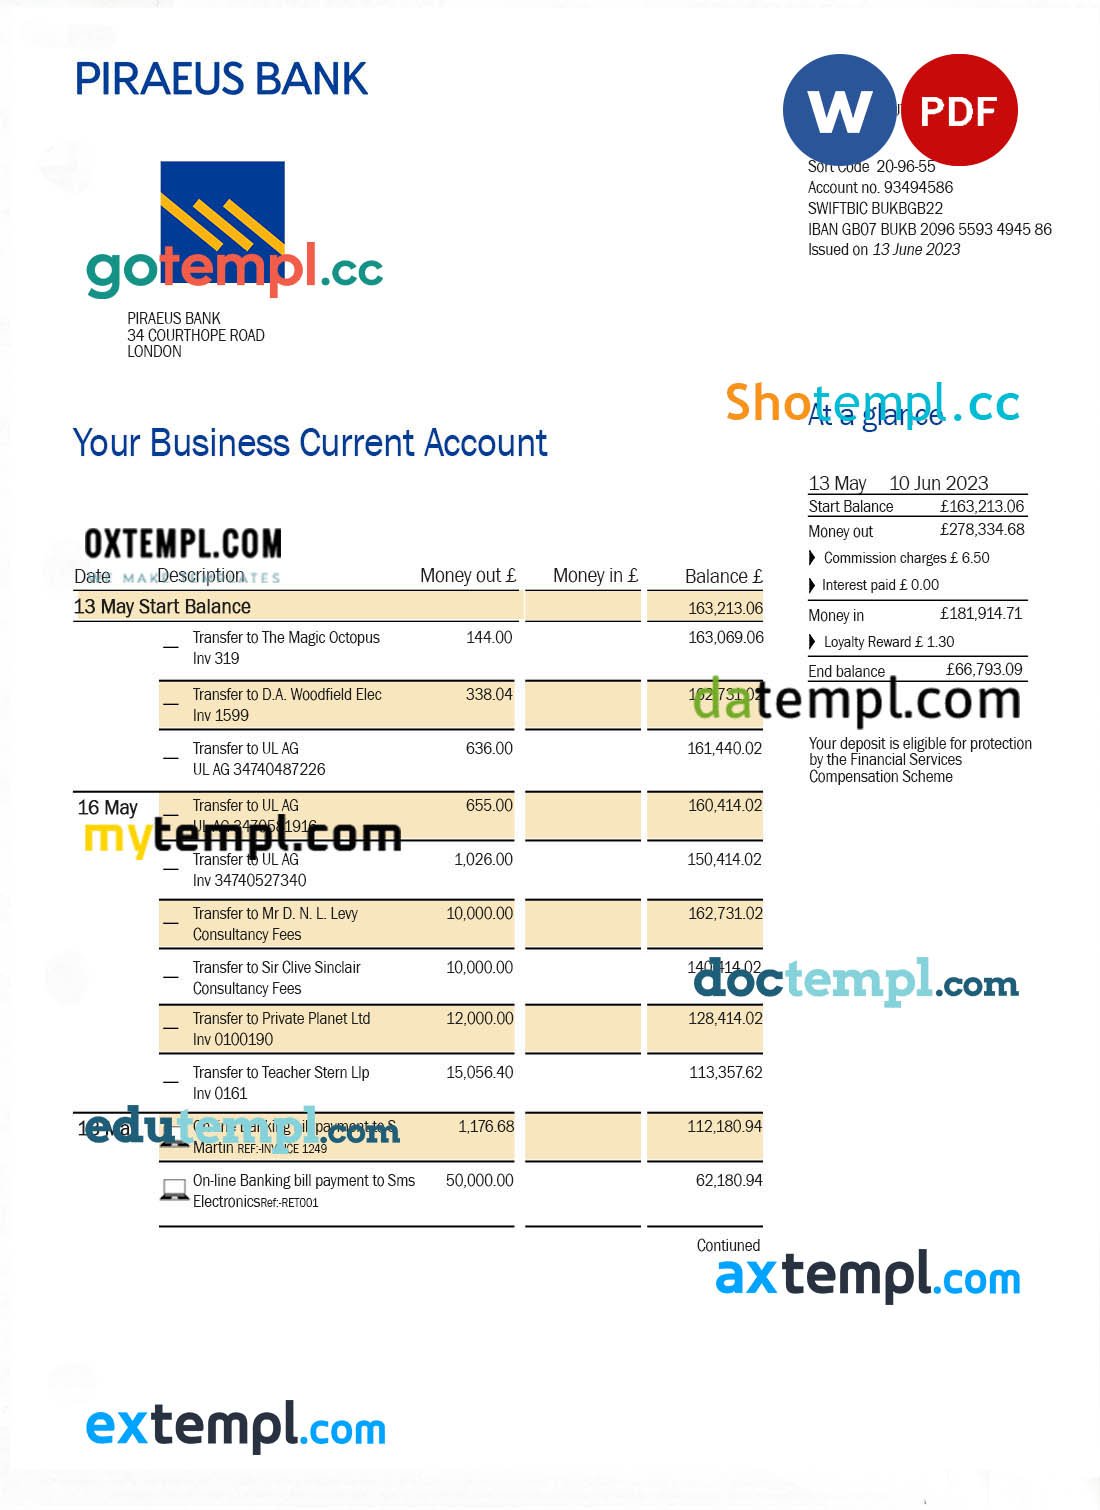 Bcr Bank company checking account statement Word and PDF template